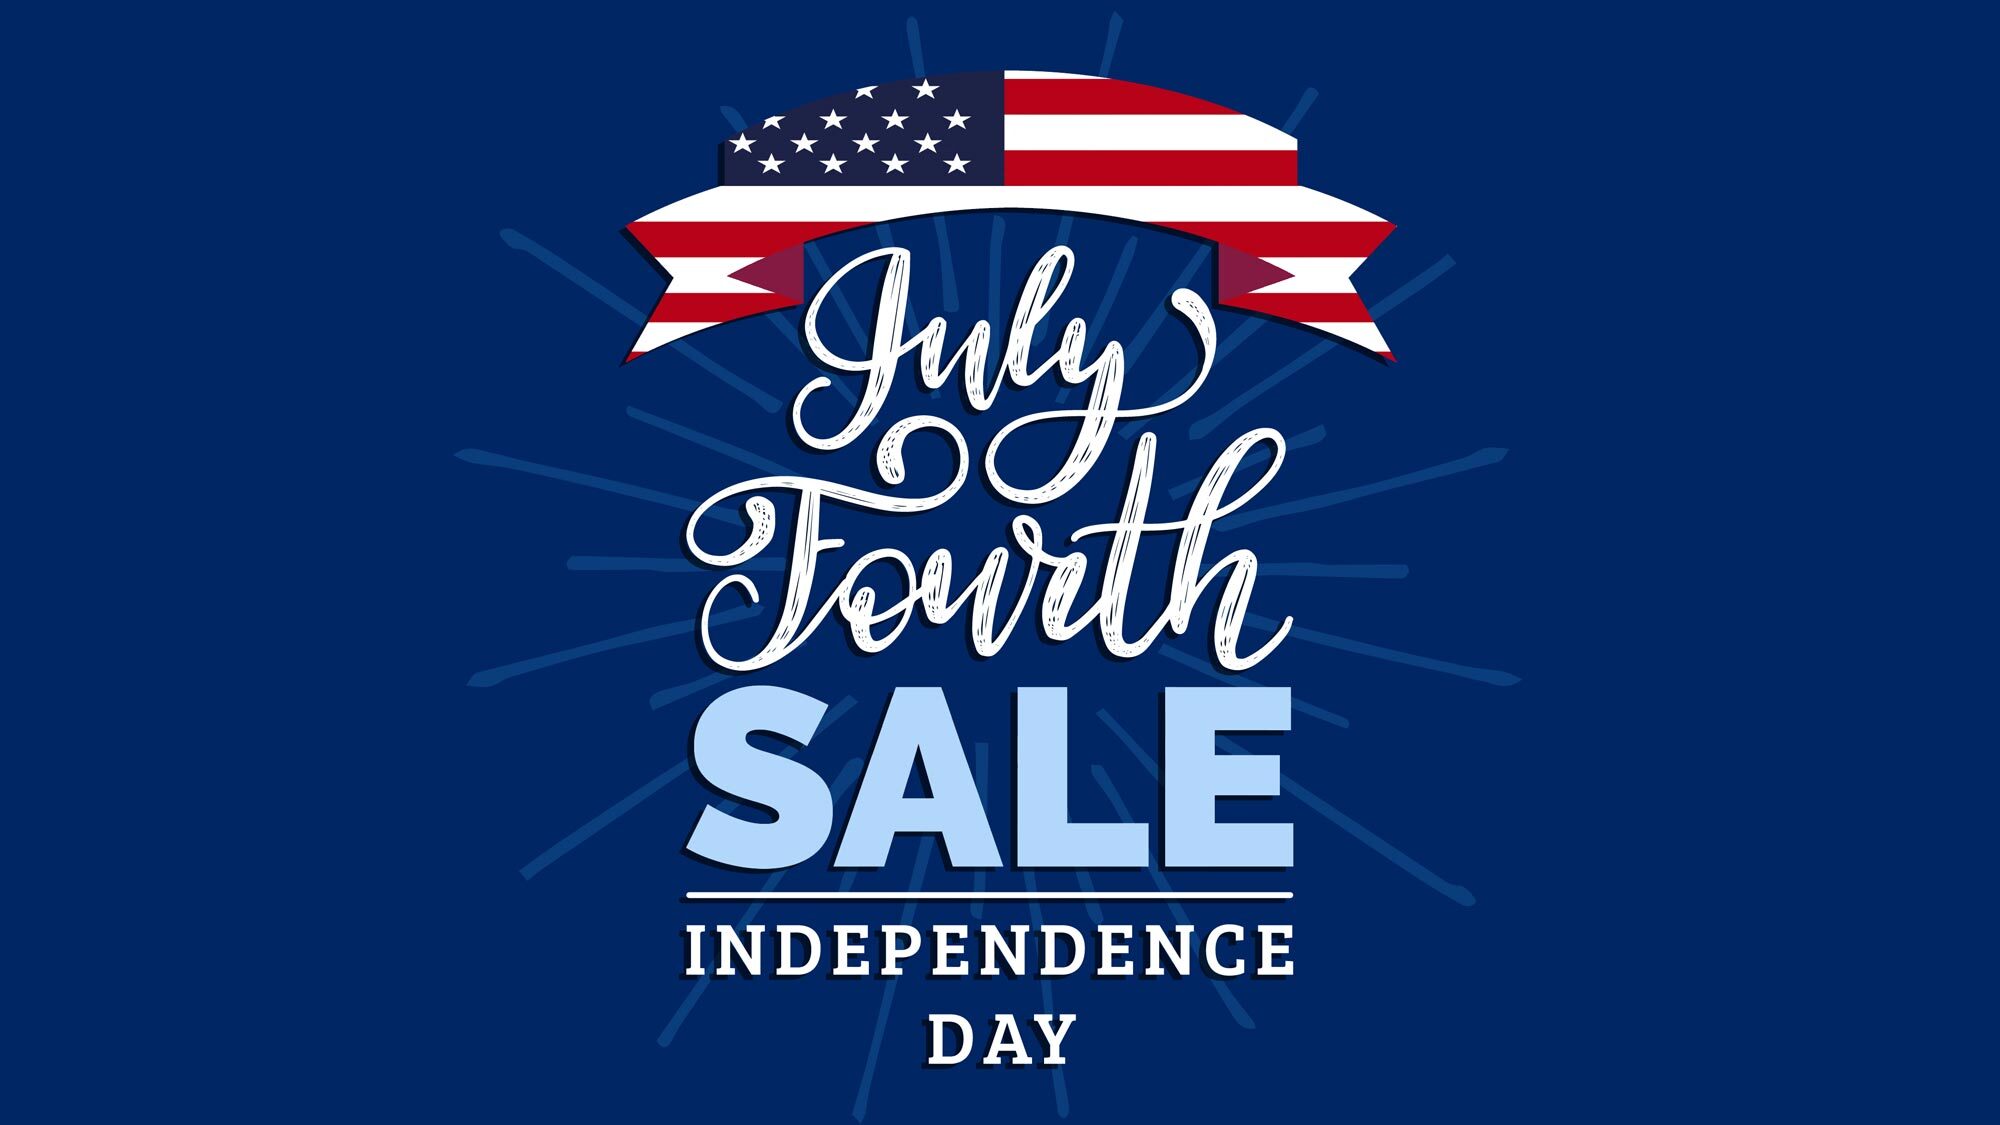 4th of July sales 2020 the best deals from Home Depot, Lowe's and Best Buy